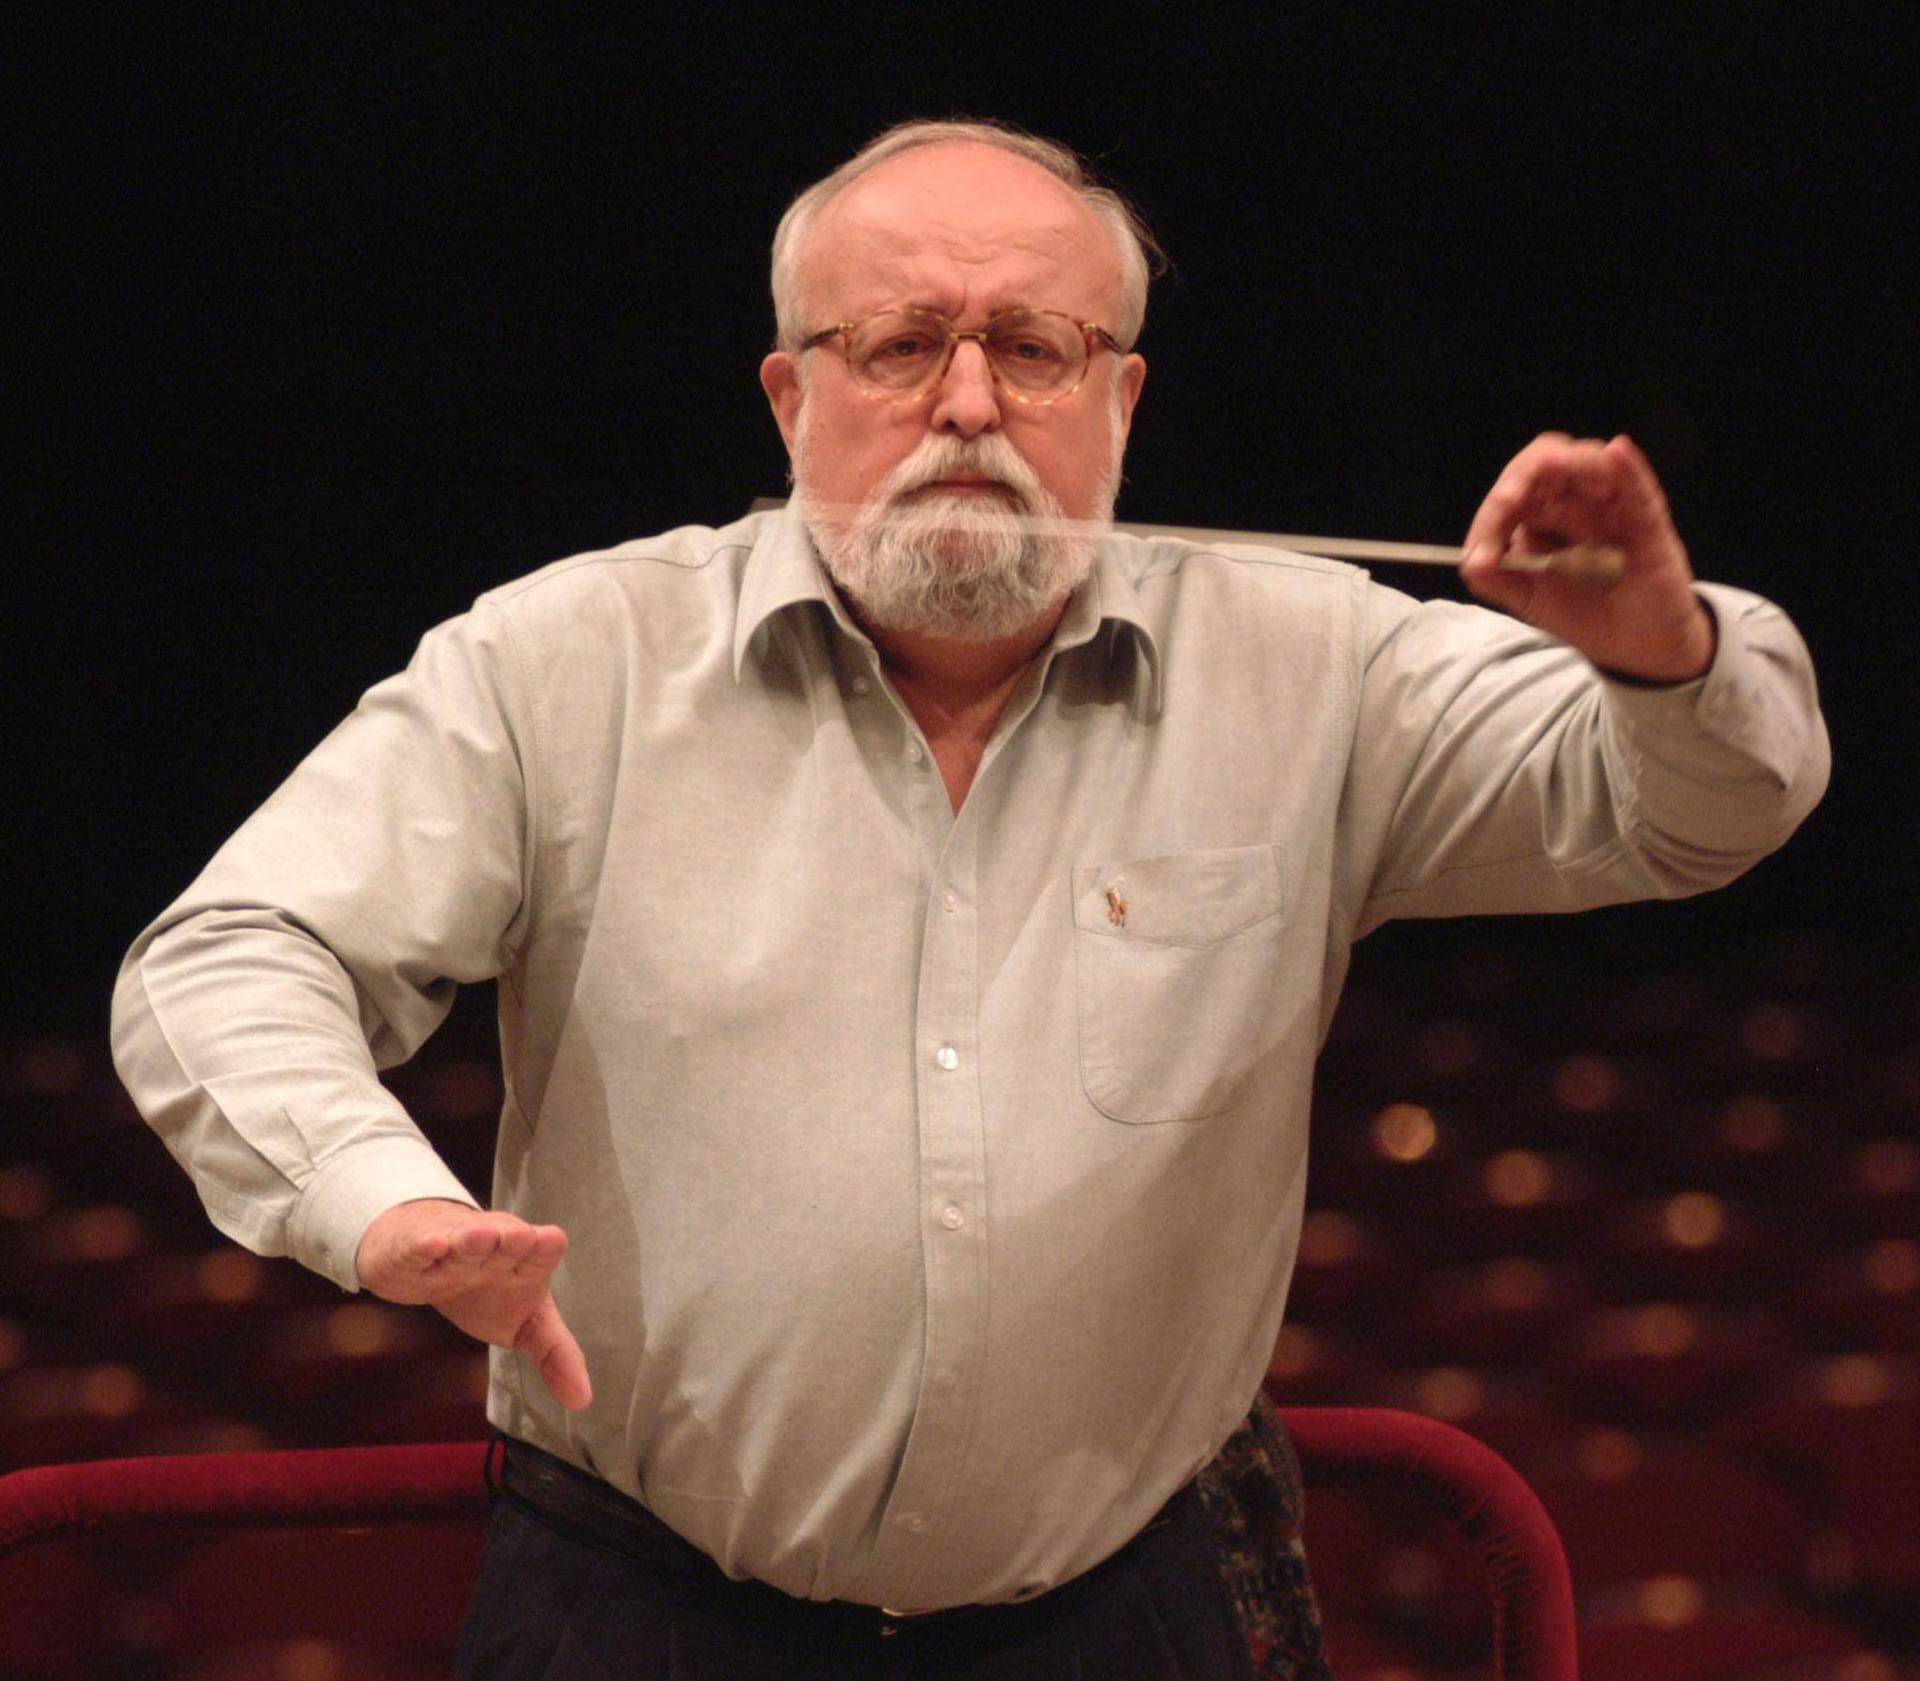 Polish composer Krzysztof Penderecki during a rehearsal at the National Philharmonic in Warsaw